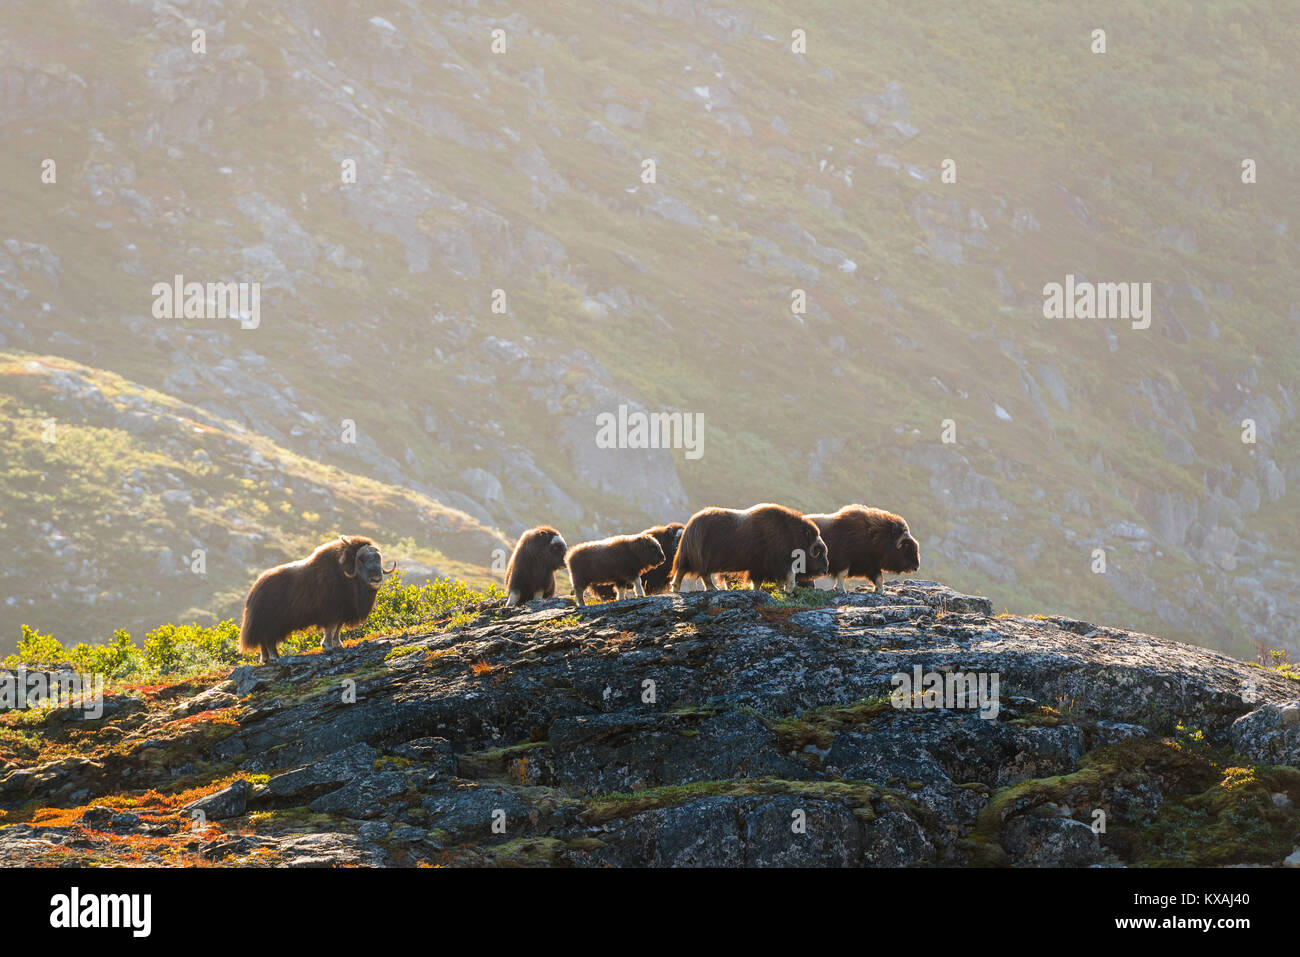 Musk oxen (Ovibos moschatus), herd in rocky landscape, West Greenland, Greenland Stock Photo